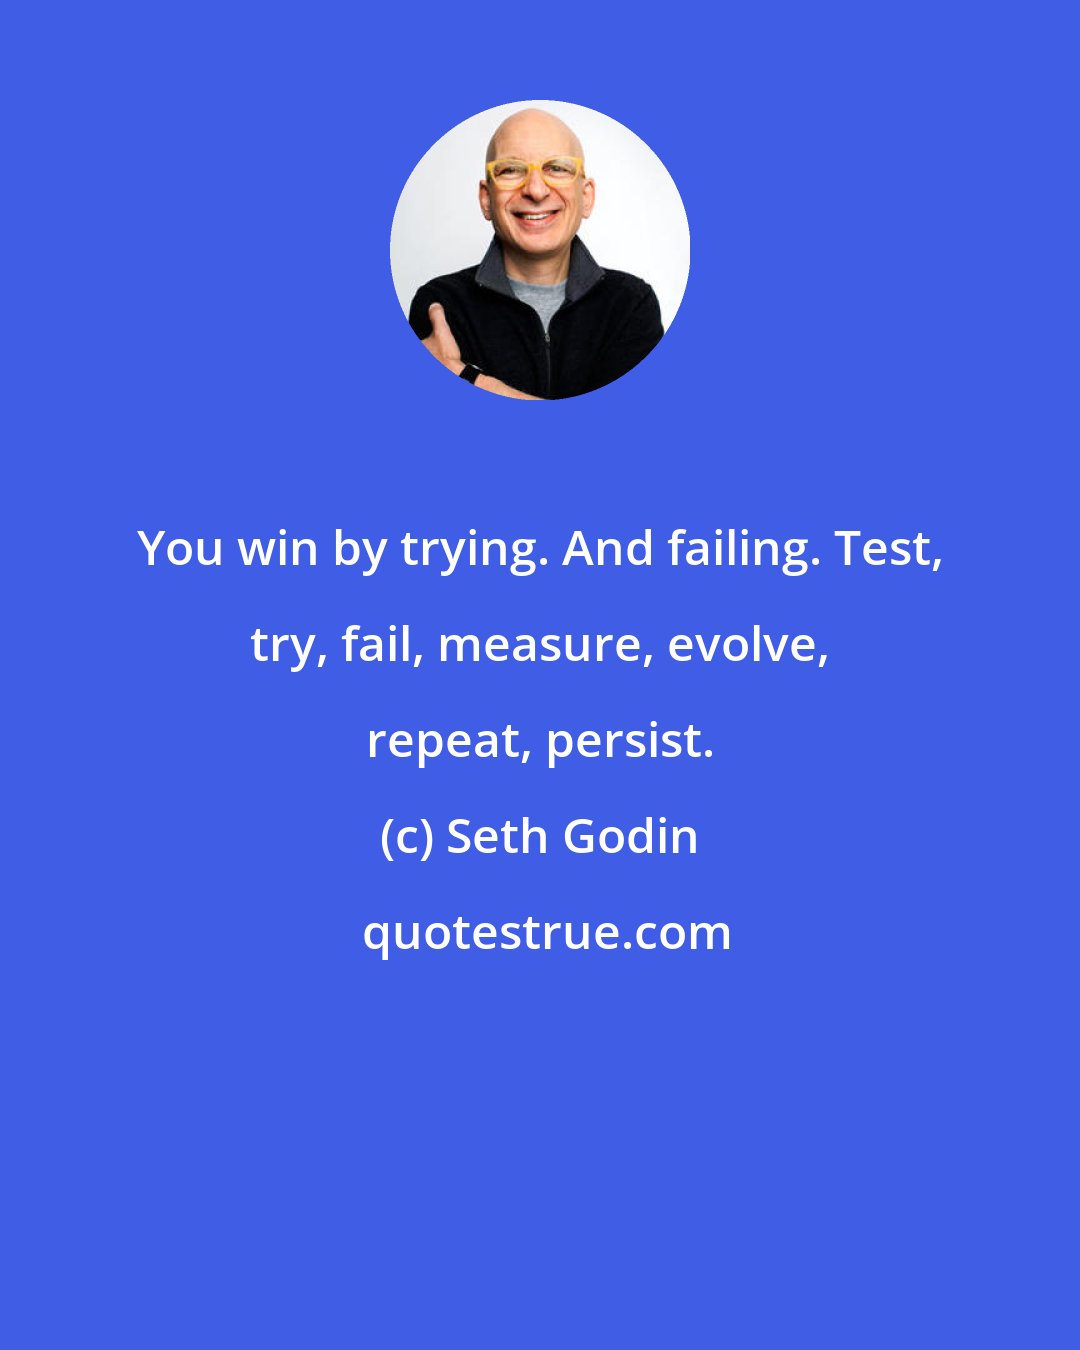 Seth Godin: You win by trying. And failing. Test, try, fail, measure, evolve, repeat, persist.